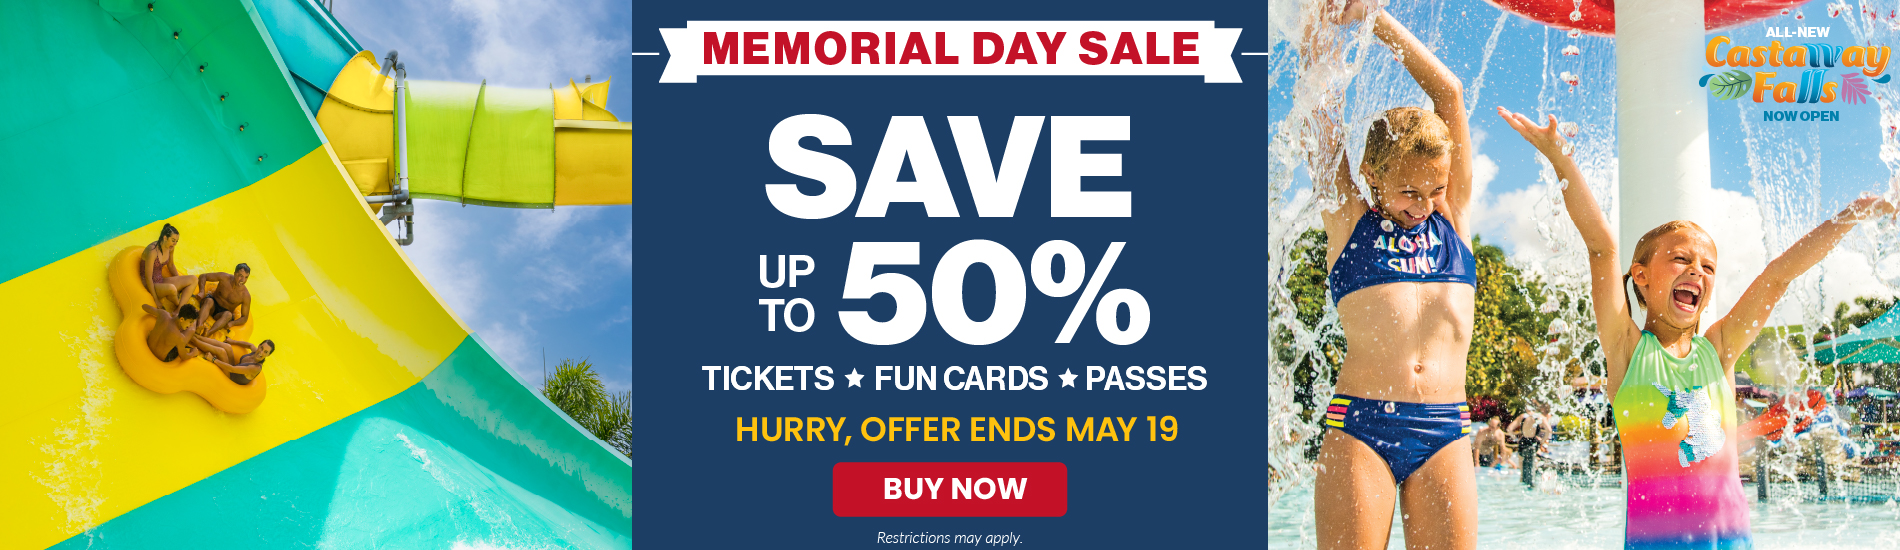 Save up to 50% on tickets, fun cards, passes